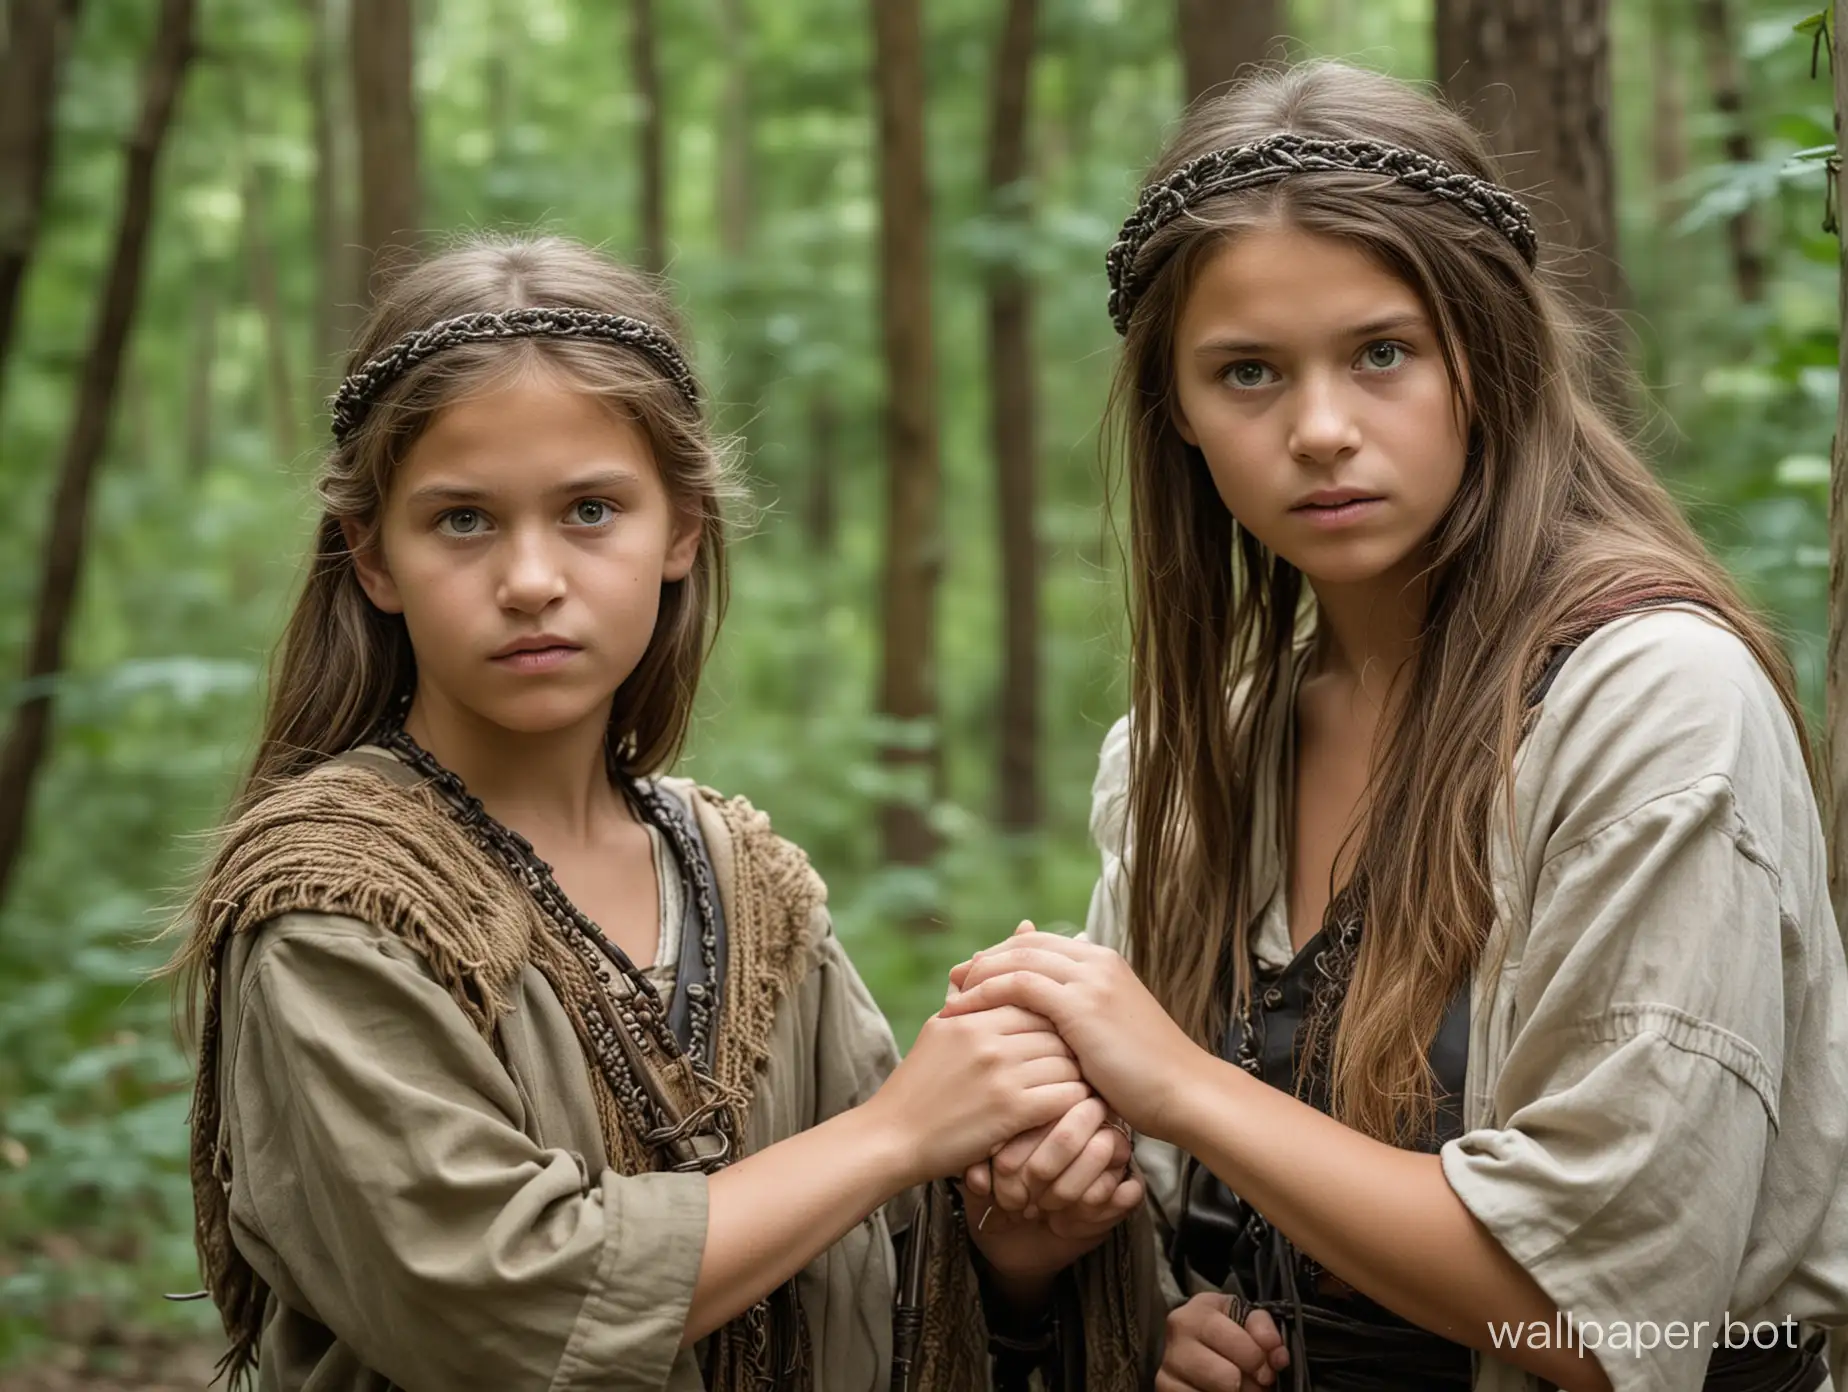 Mother and daughter 11 years old barbarians sneak in the wild forest